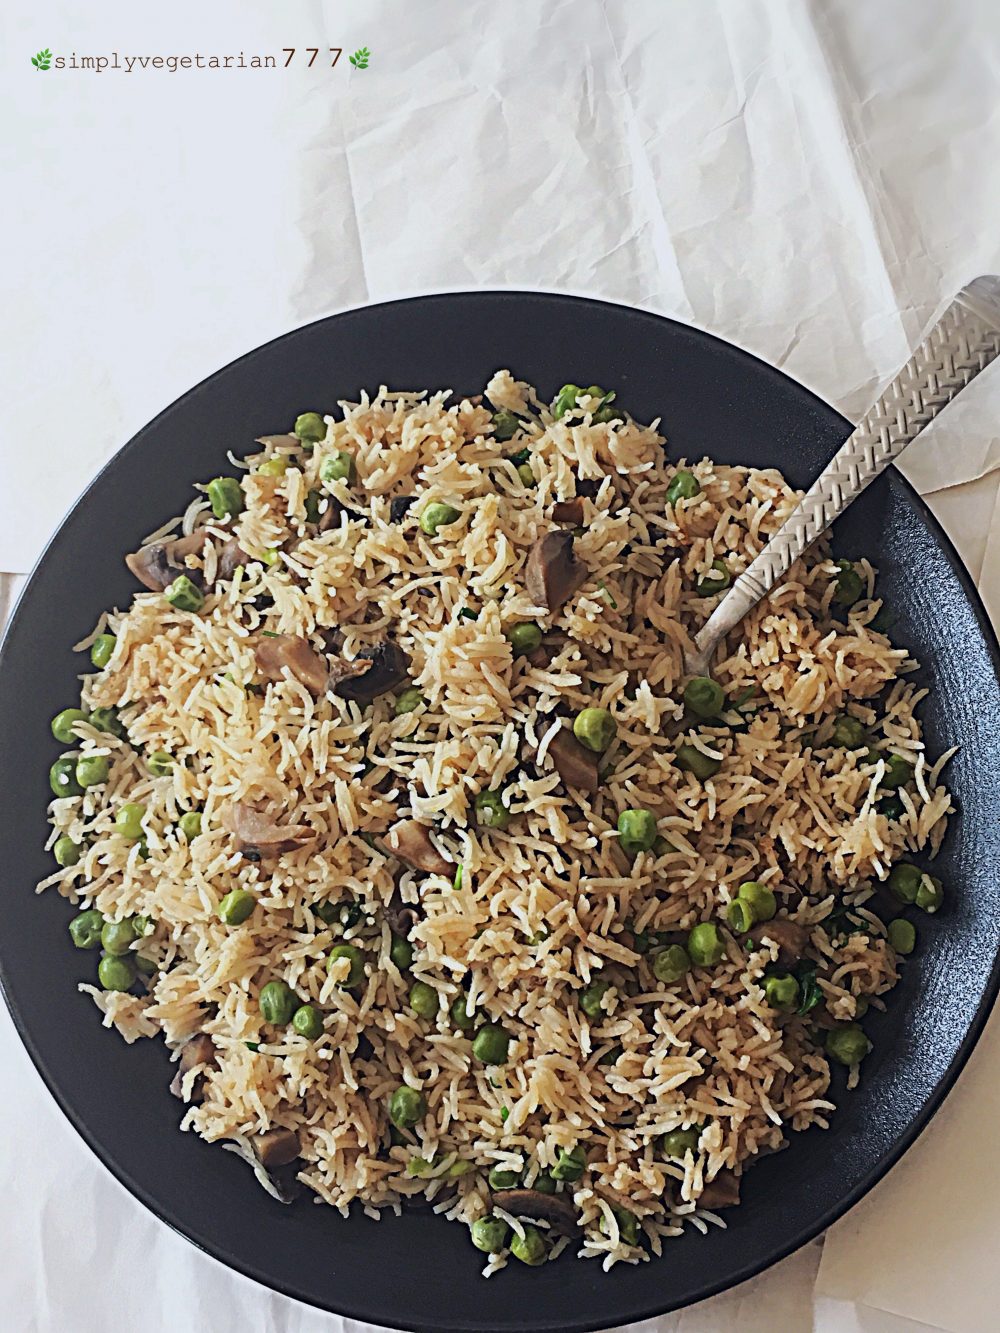 This Instant Pot Coconut Rice is cooked with only 5 main ingredients. It is a fail-proof recipe that is Easy, Efficient and Deliciously Vegetarian cooked in Instant Pot. The best part is that you can personalize it any way that you like. These taste best when served Hot. Coconut Curry Rice can be easily paired with korma, curry or savored as is. Stove Top and Pressure cooker instructions are also included in the description. A video snippet is included for the better understanding. #instantpotrice #coconutrice #coconutmilkrice #ricerecipes #coconutrecipes #instantpotveganrecipes #instantpotglutenfreerecipes #instantpoteasyrecipes #instantpotbeginnerrecipes